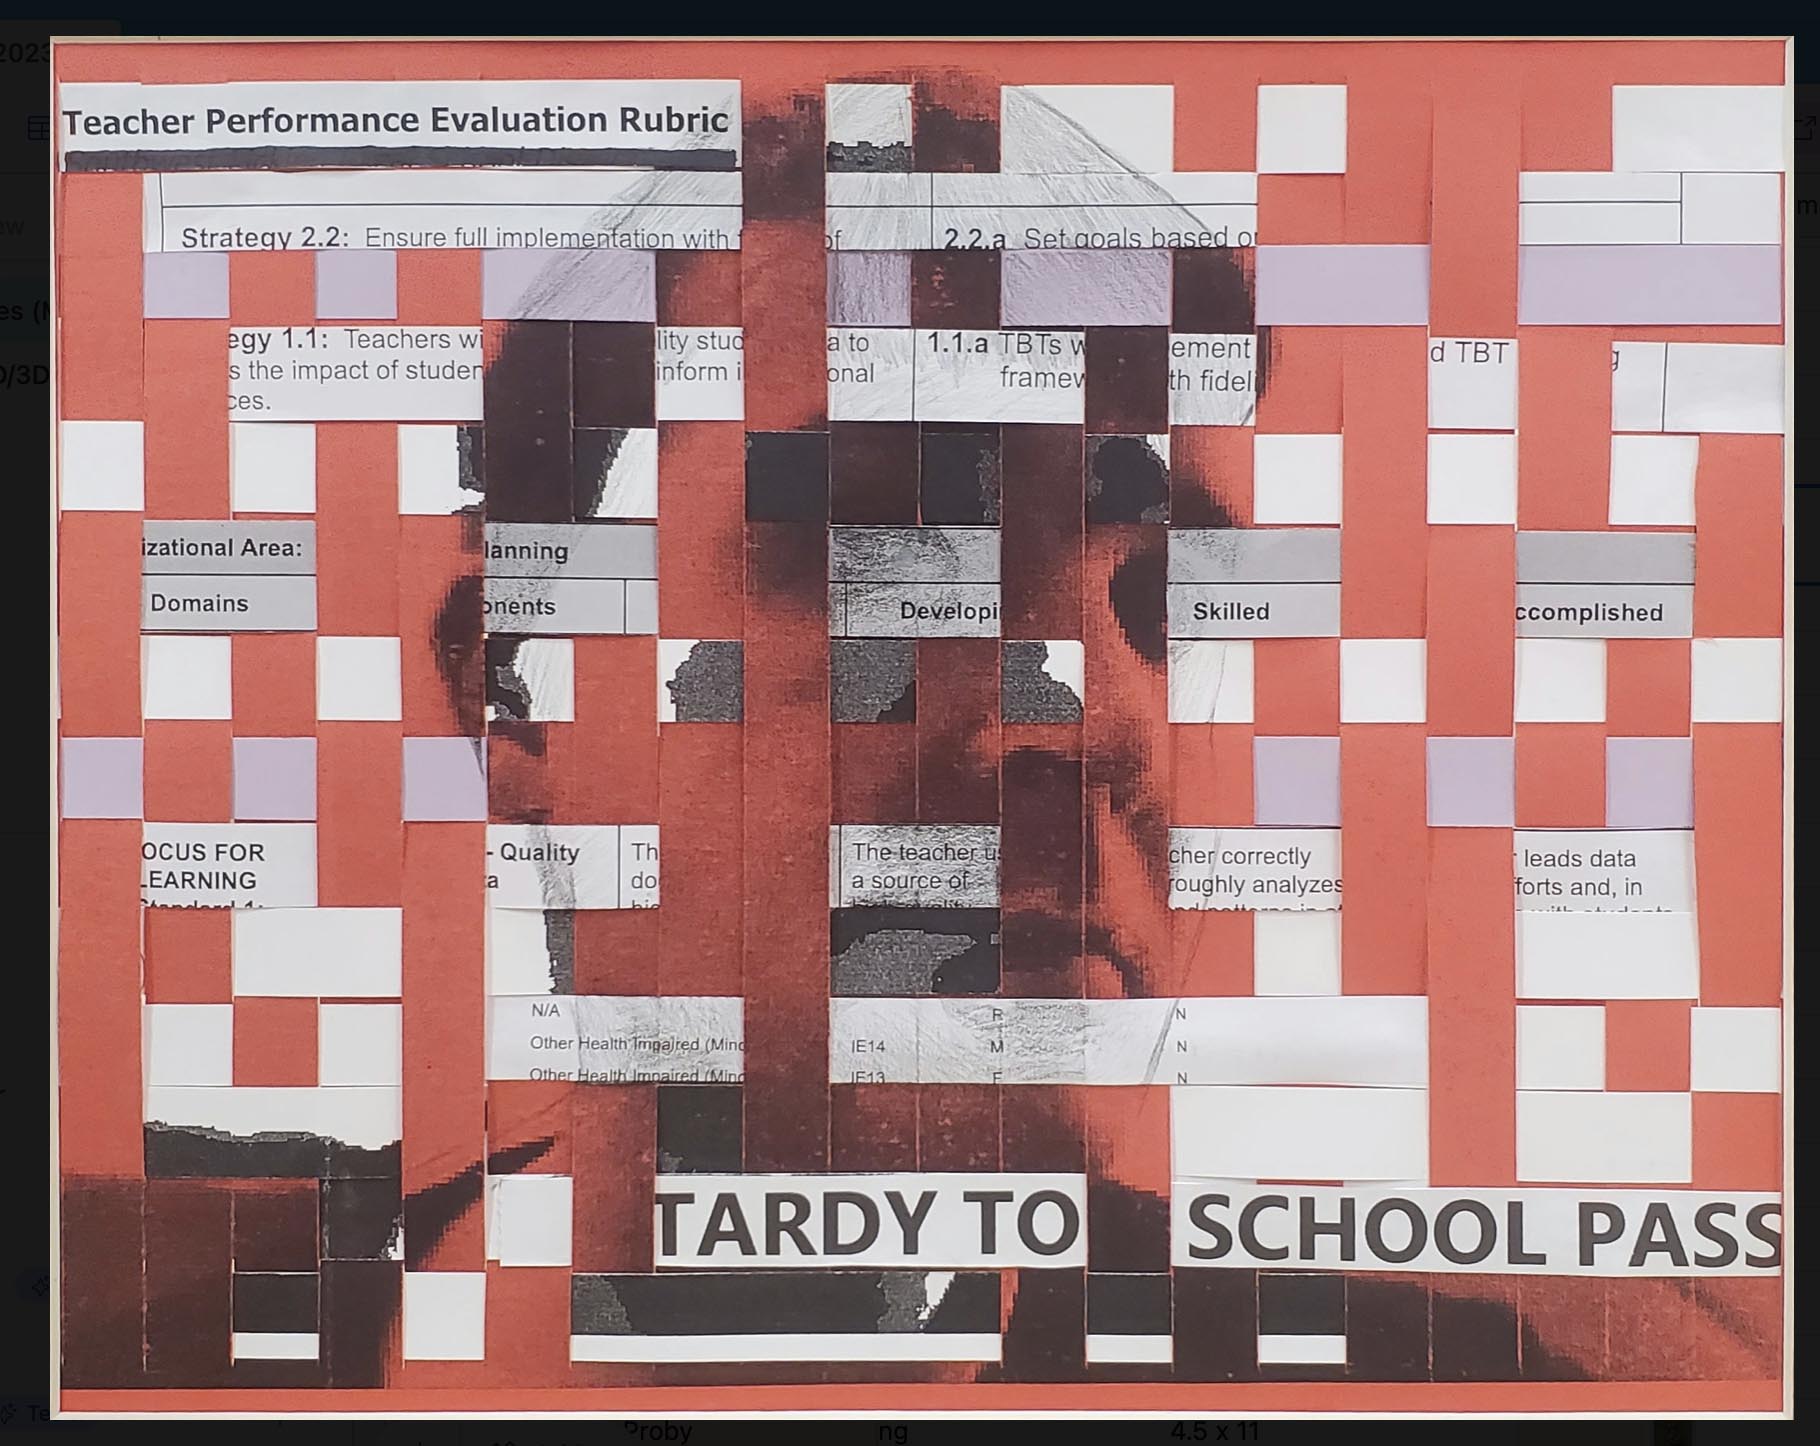 Red-tinted photograph of a light-skinned man making a disgruntled face. Squares and rectangles are cut out in a checkerboard-like pattern on the photo, revealing a teacher evaluation rubric paper underneath. The piece has a distinct collage-like quality to it.